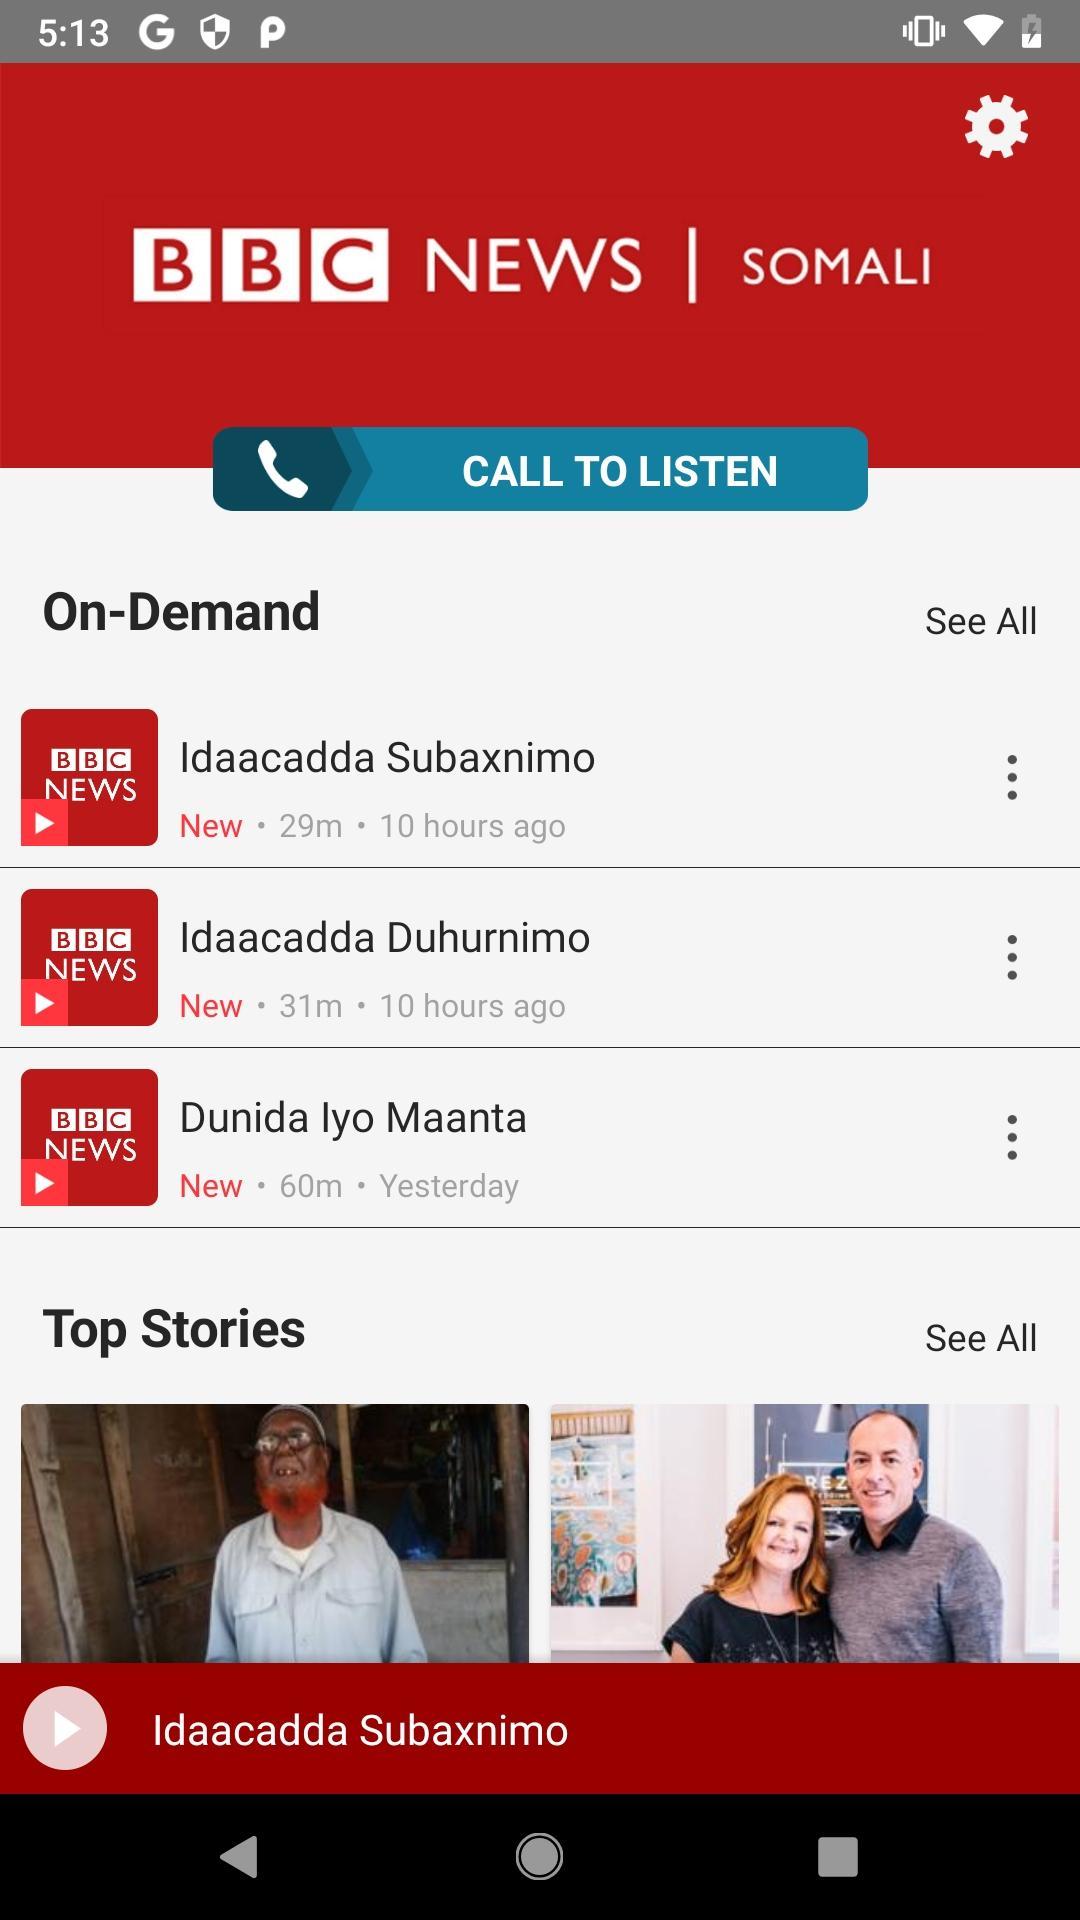 BBC News Somali for Android - APK Download